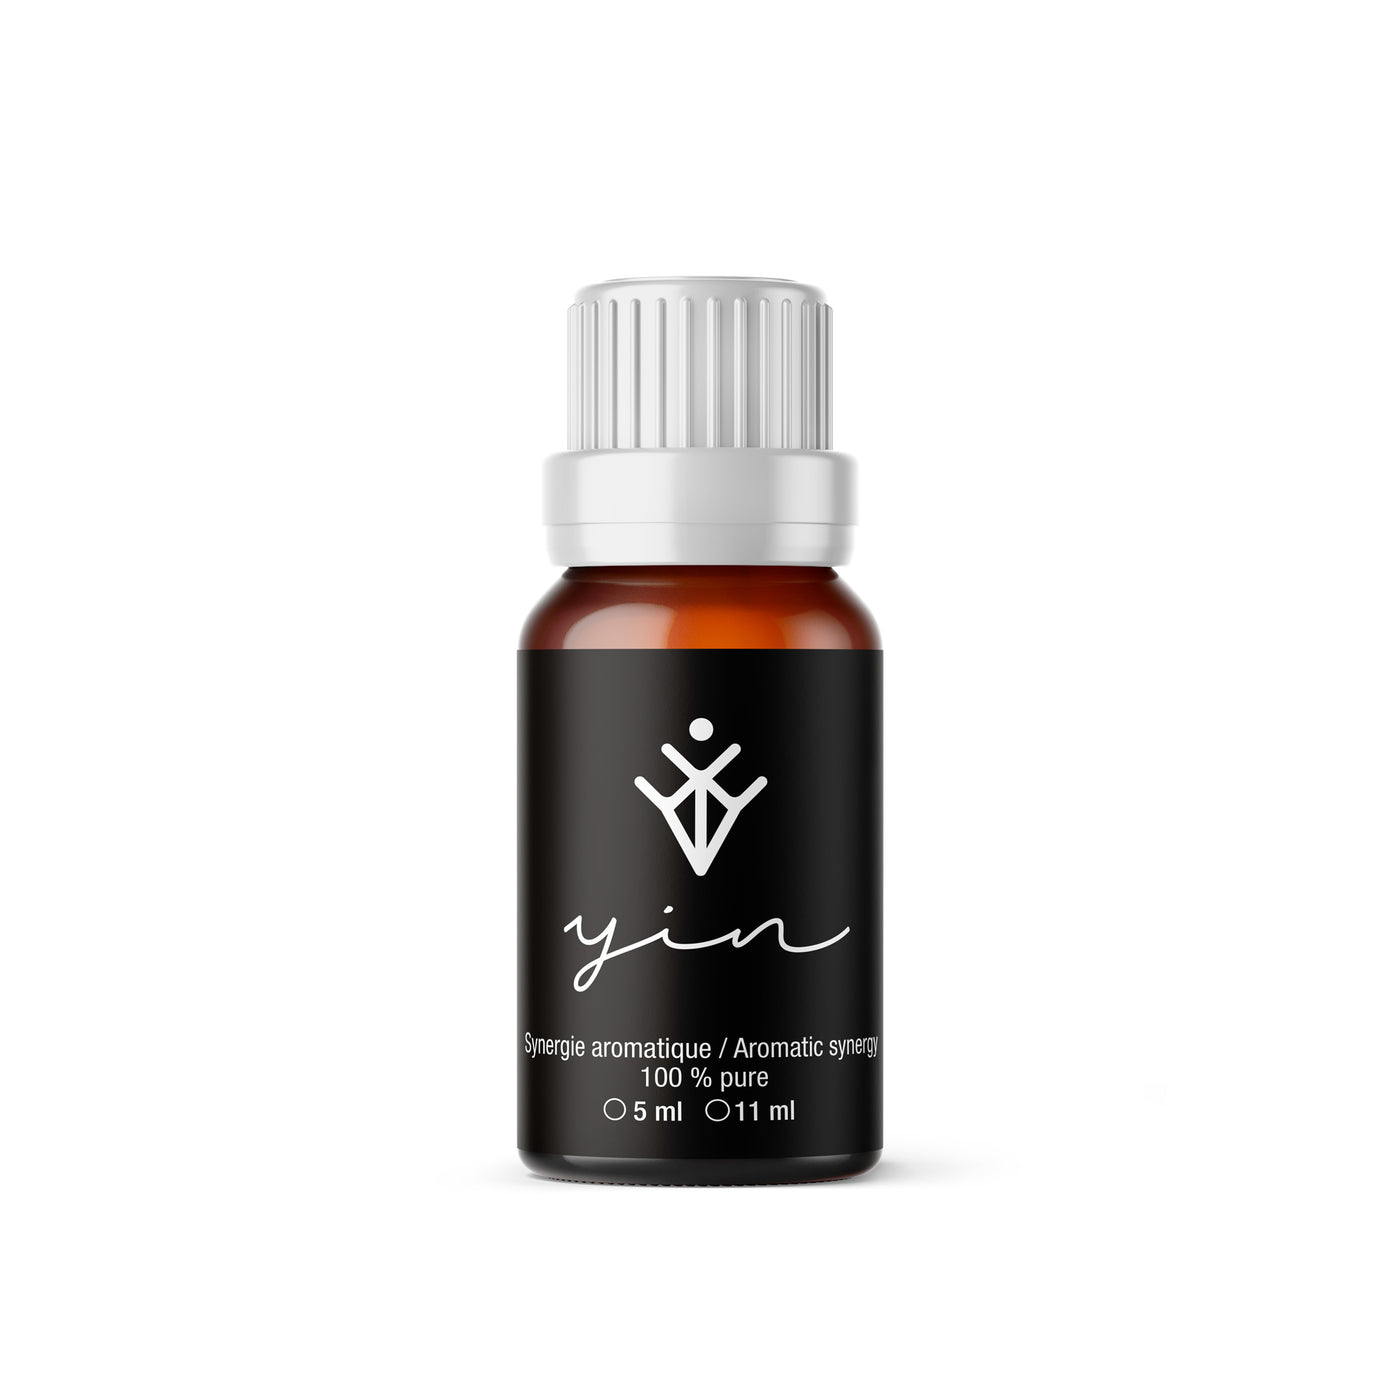 Yin - Synergie aromatique 100% pure